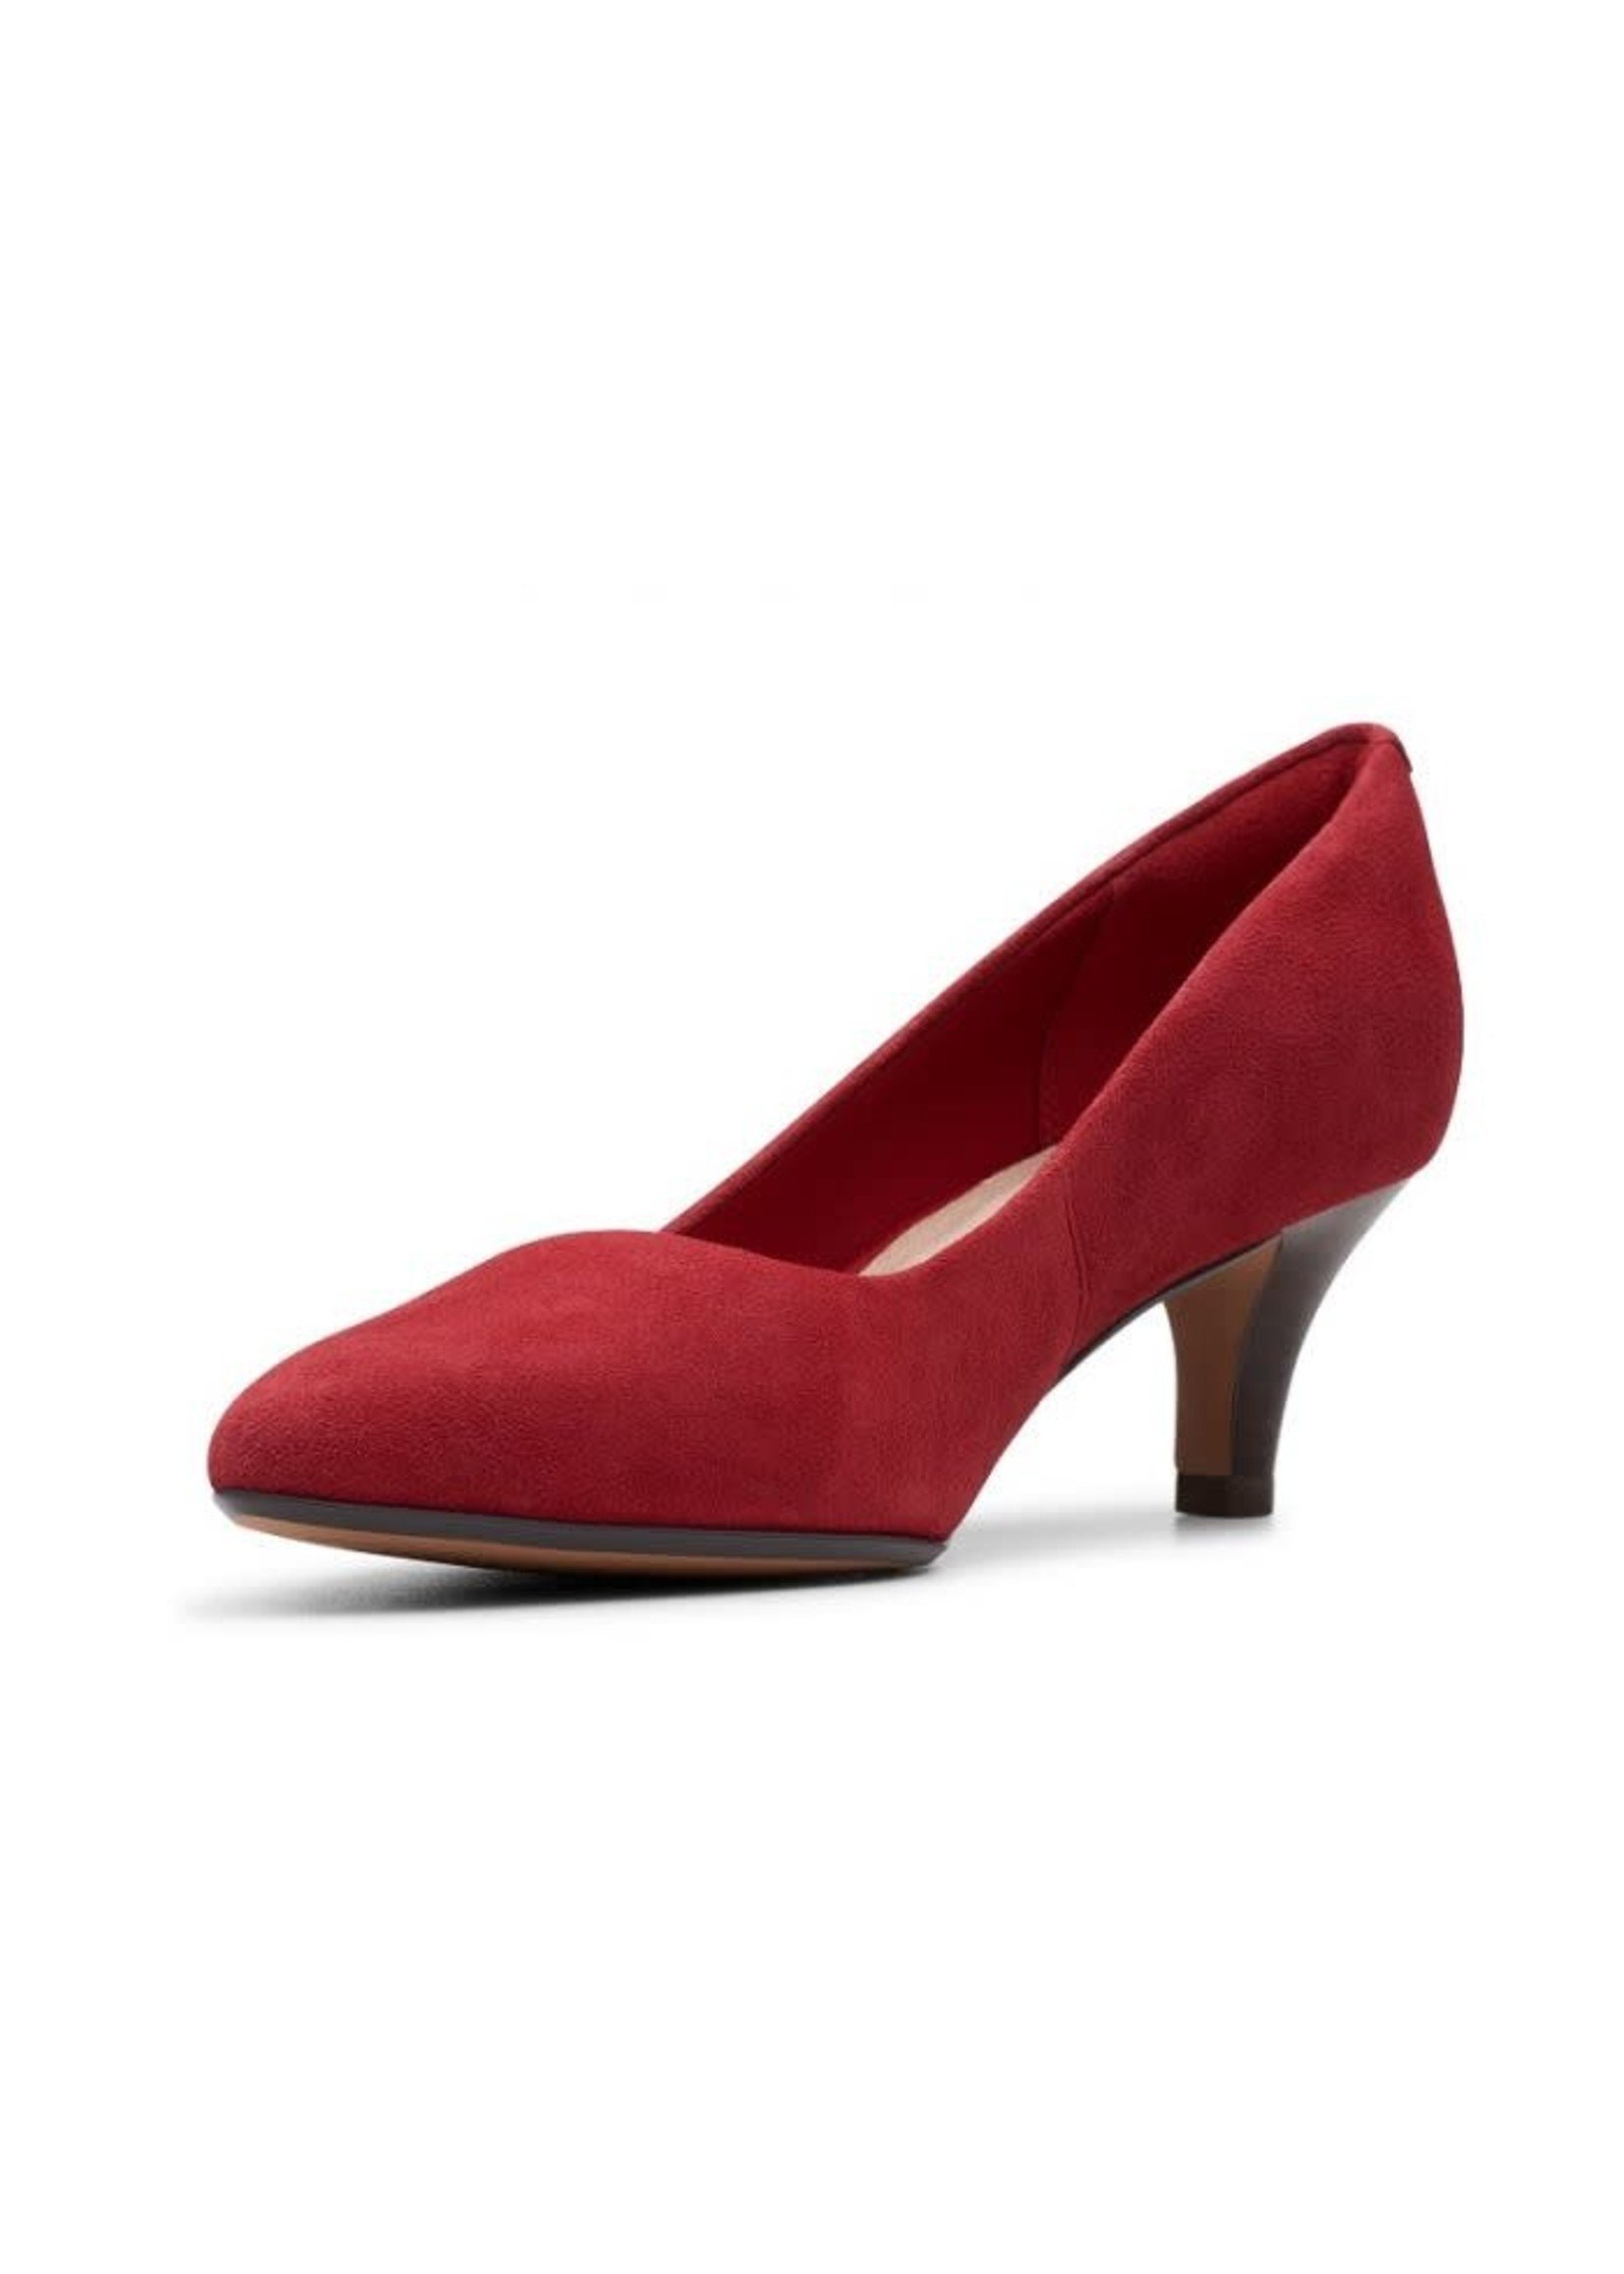 Linvale Jerica Cherry Red Pump - PHINNEYS